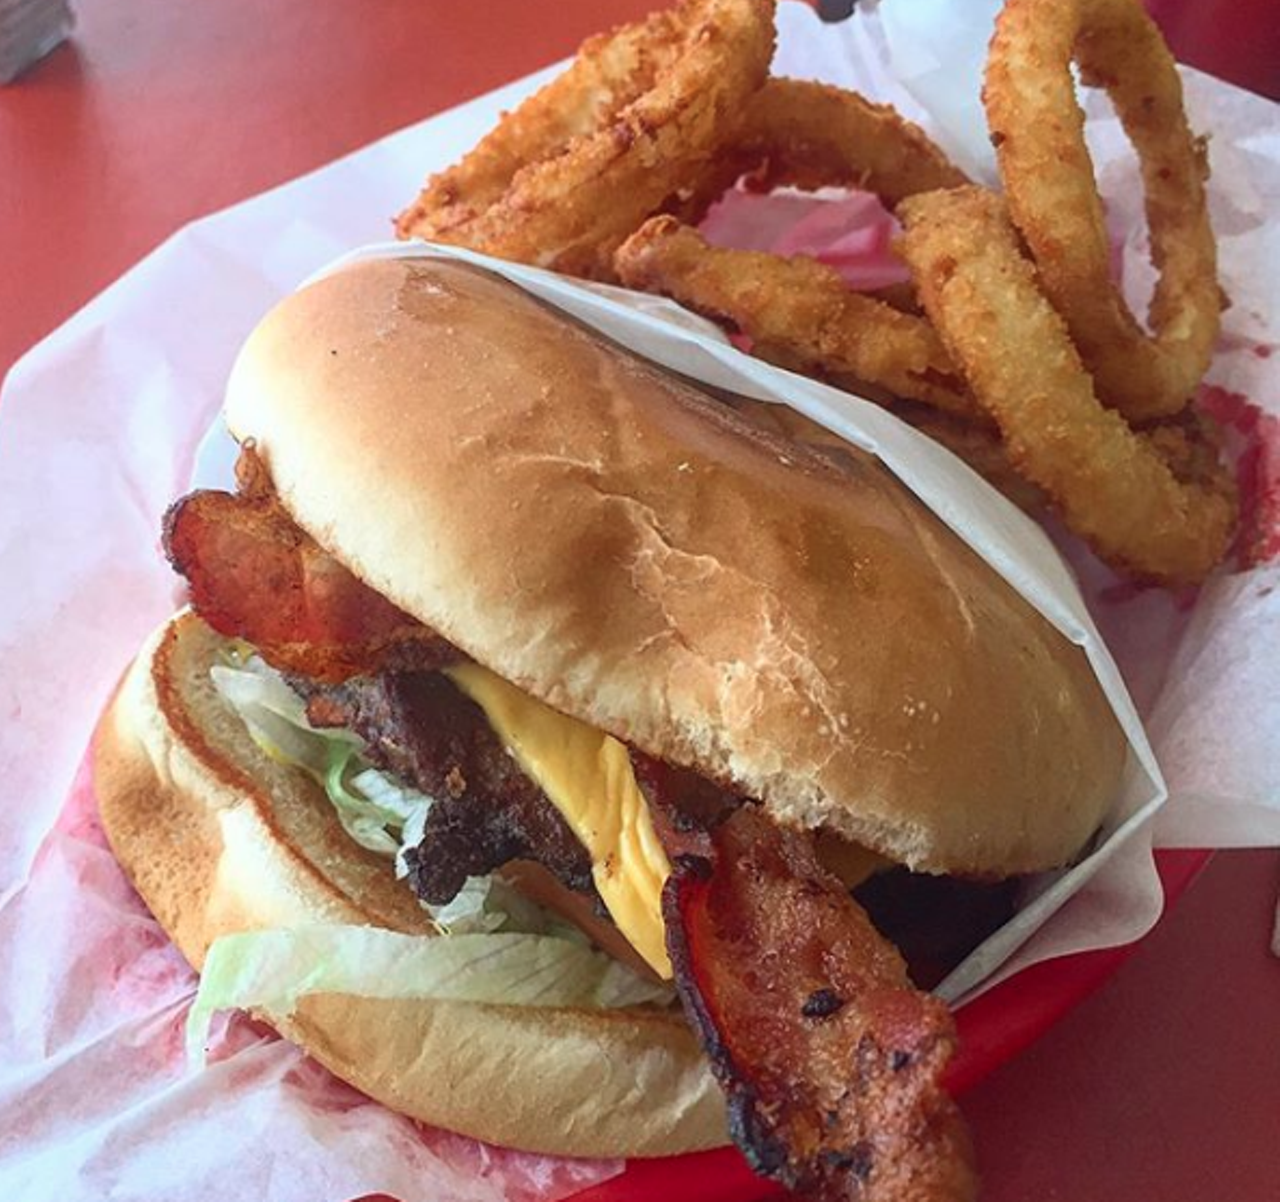 Candy’s Old Fashioned Burgers
115 S Flores St, (210) 222-9659, candysburgers.com
Channel some old-school diner vibes and munch on a juicy burger from Candy’s. Feel free to add extras, like mushrooms, jalapenos, bacon, chili or BBQ sauce.
Photo via Instagram / lplee_